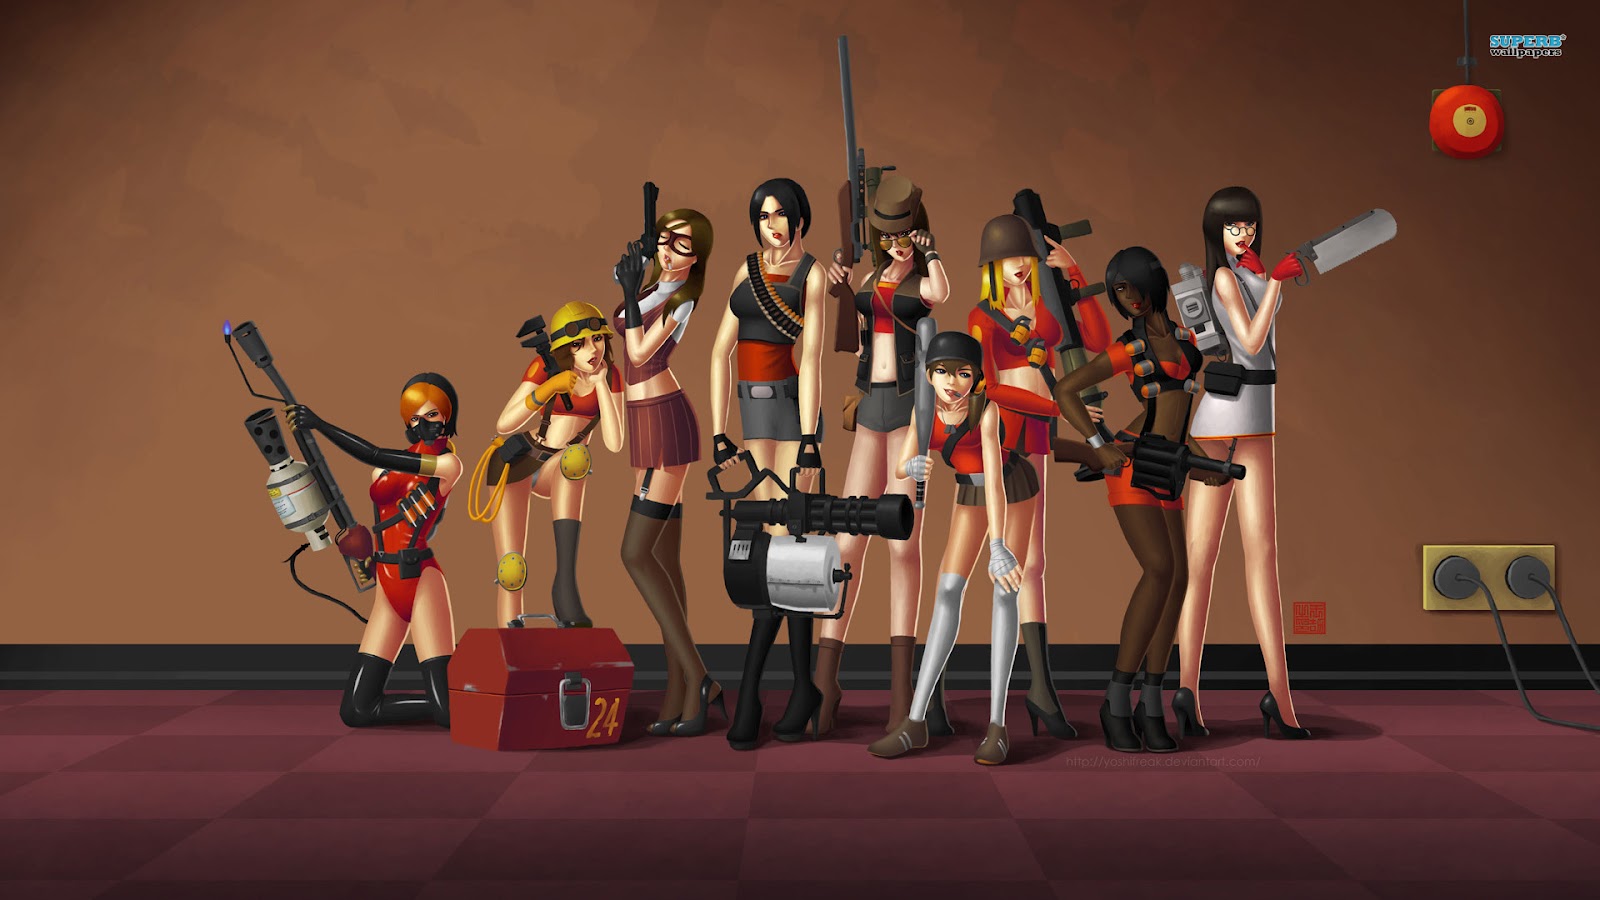 free wa11papers: Team Fortress 2 Wallpaper